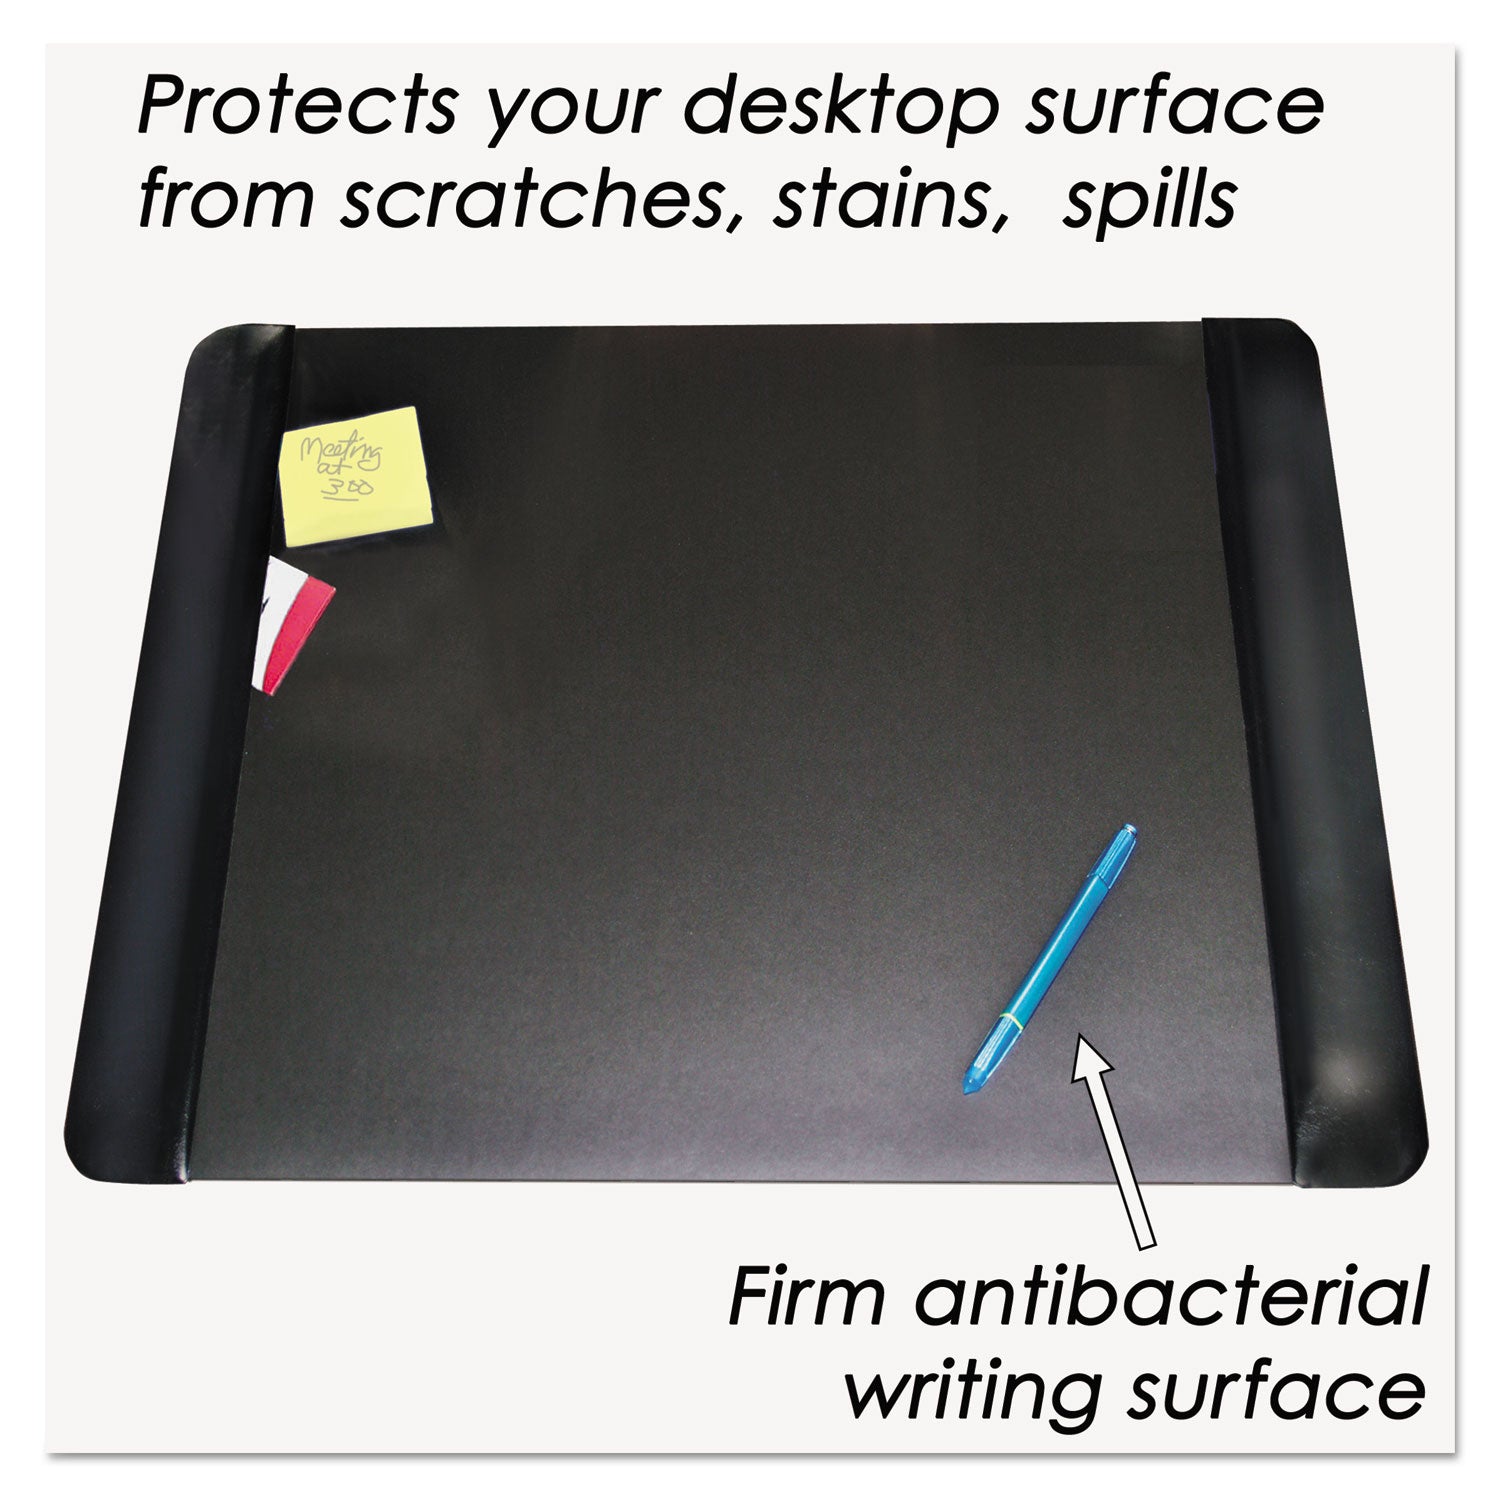 Executive Desk Pad with Antimicrobial Protection, Leather-Like Side Panels, 24 x 19, Black - 